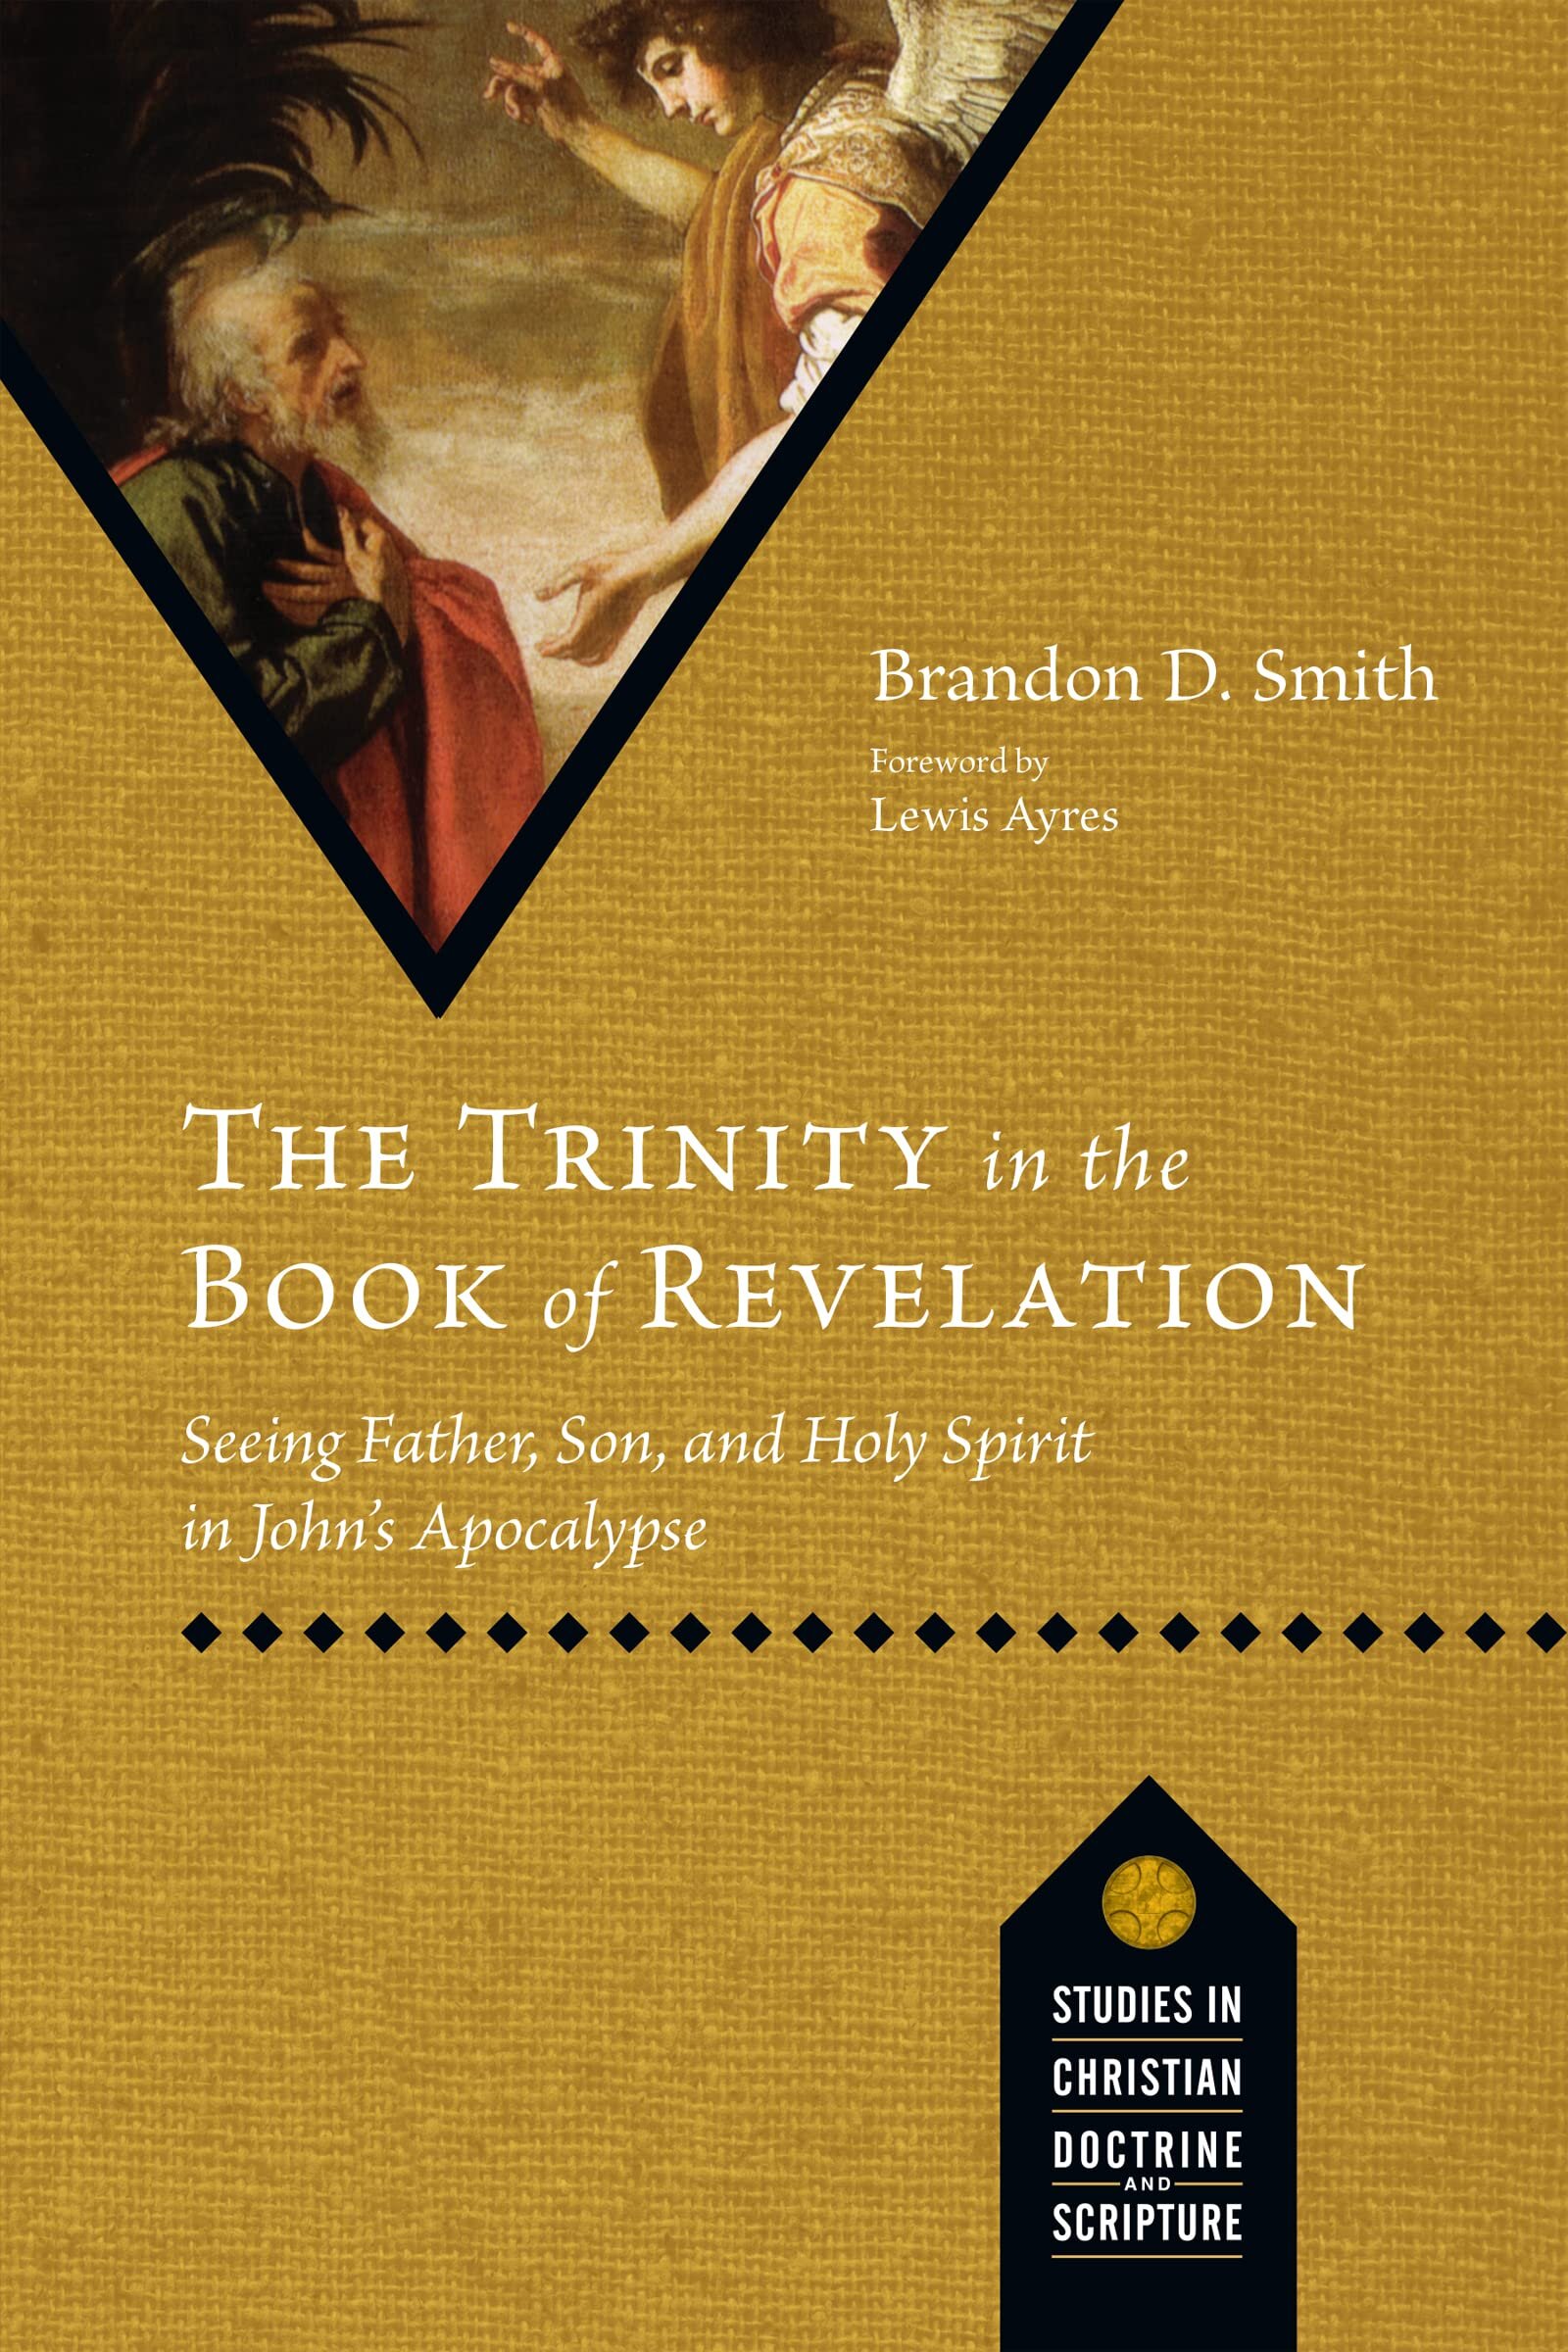 The Trinity in the Book of Revelation: Seeing Father, Son, and Holy Spirit in John’s Apocalypse (Studies in Christian Doctrine and Scripture | SCDS)